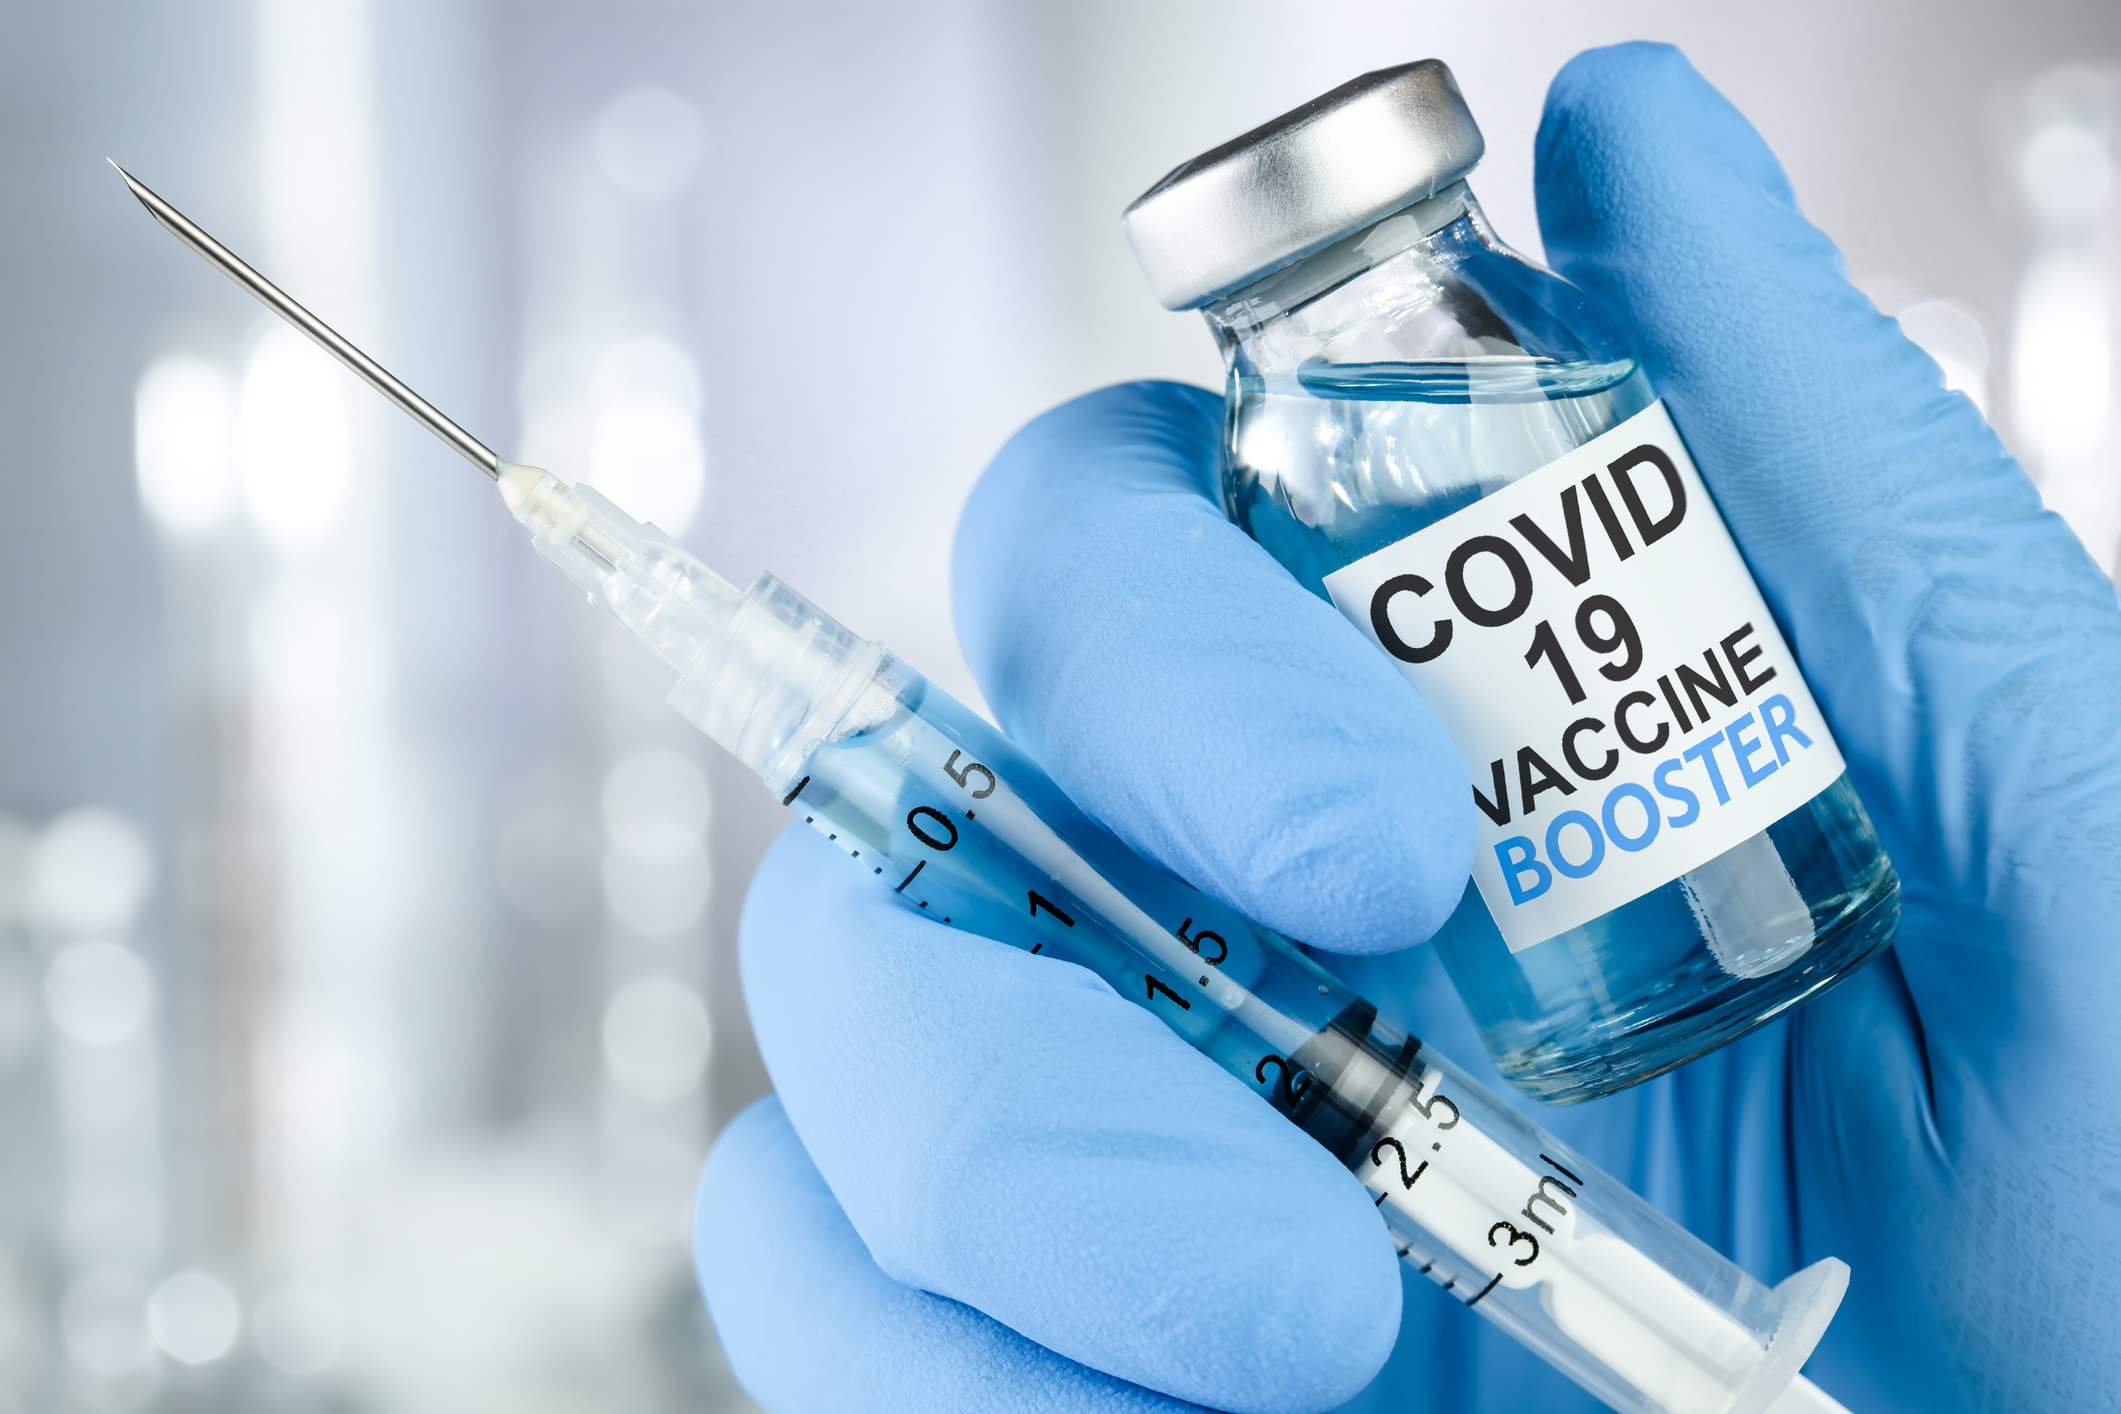 Hand in blue medical gloves holding a syringe and vaccine vial with Covid 19 Vaccine Booster text, for Coronavirus booster shot.